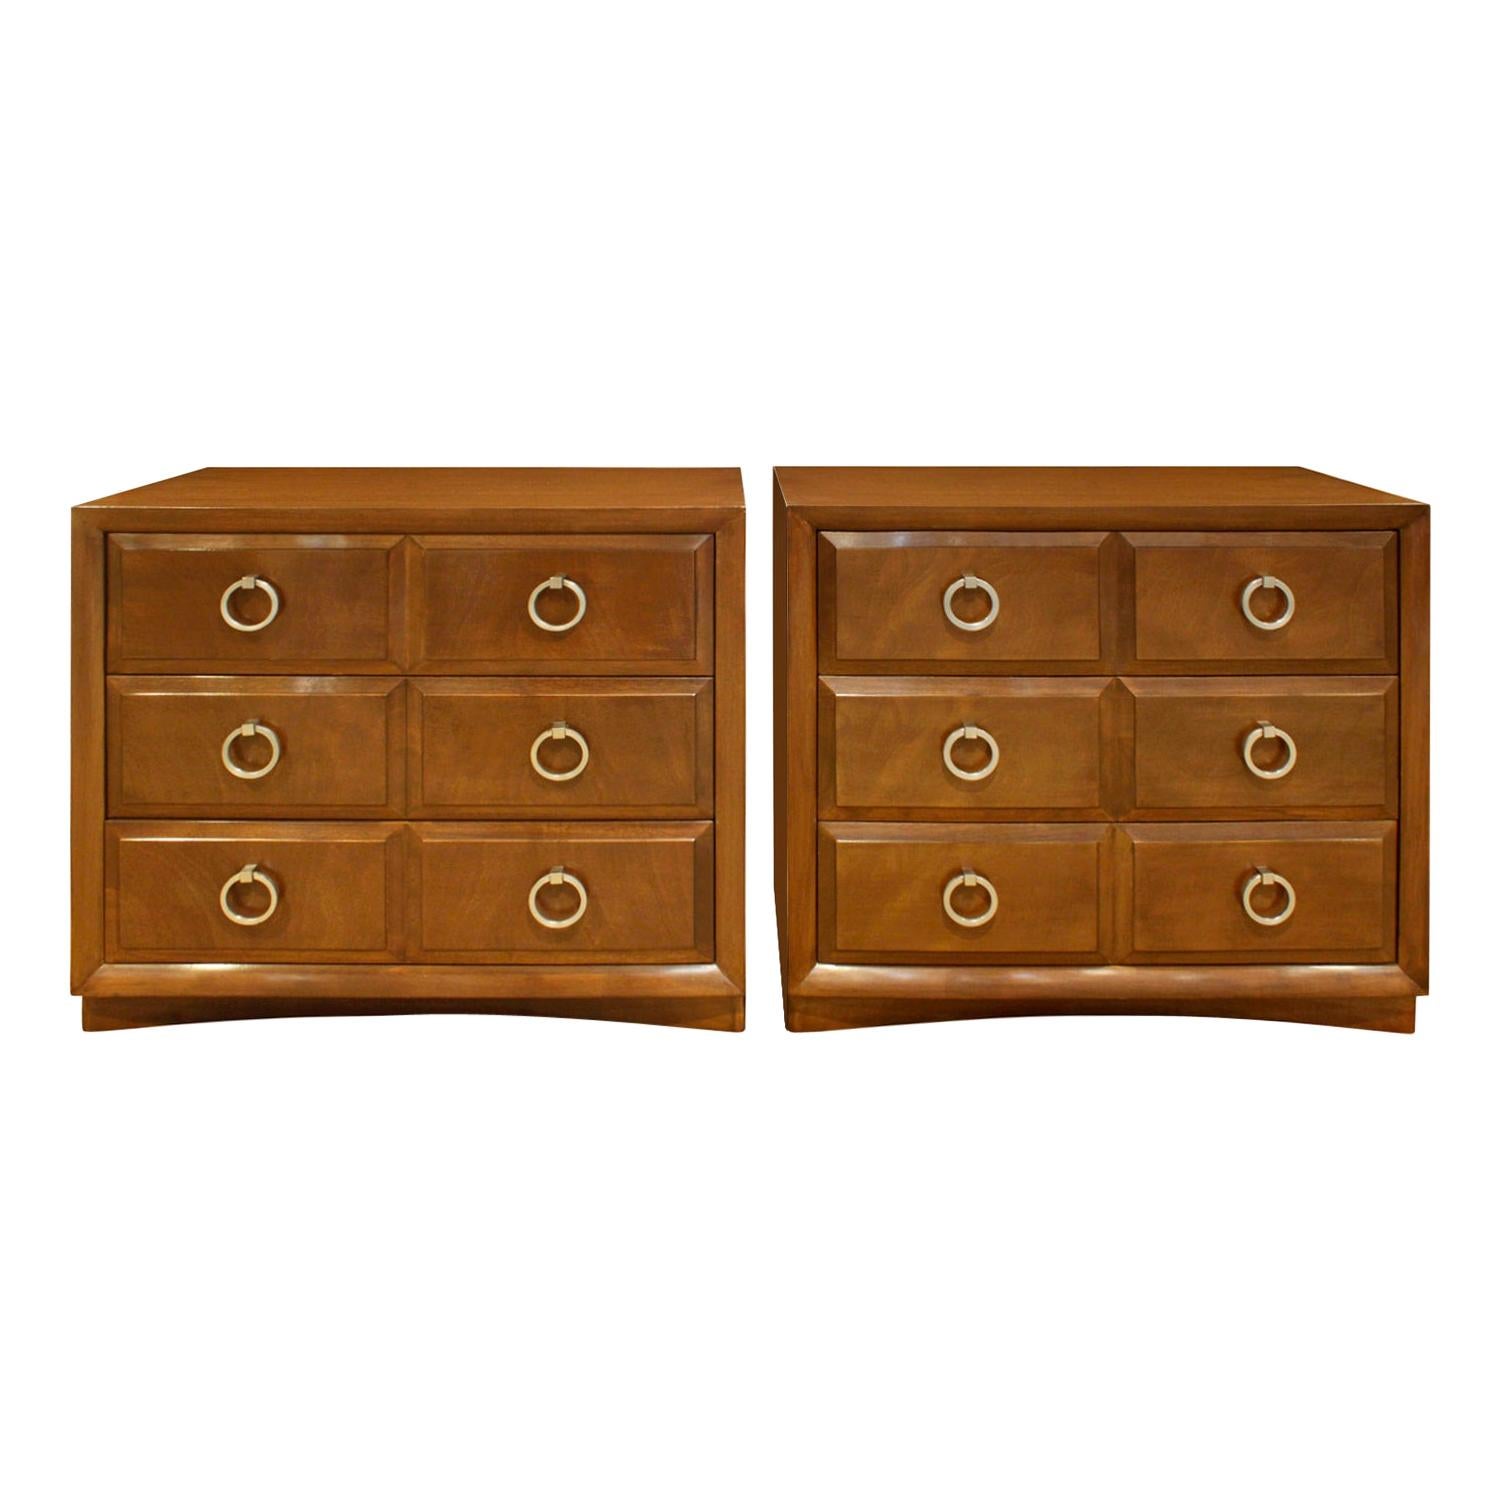 T.H. Robsjohn-Gibbings Pair of Bedside Tables / Chests in Walnut, 1950s 'Signed'